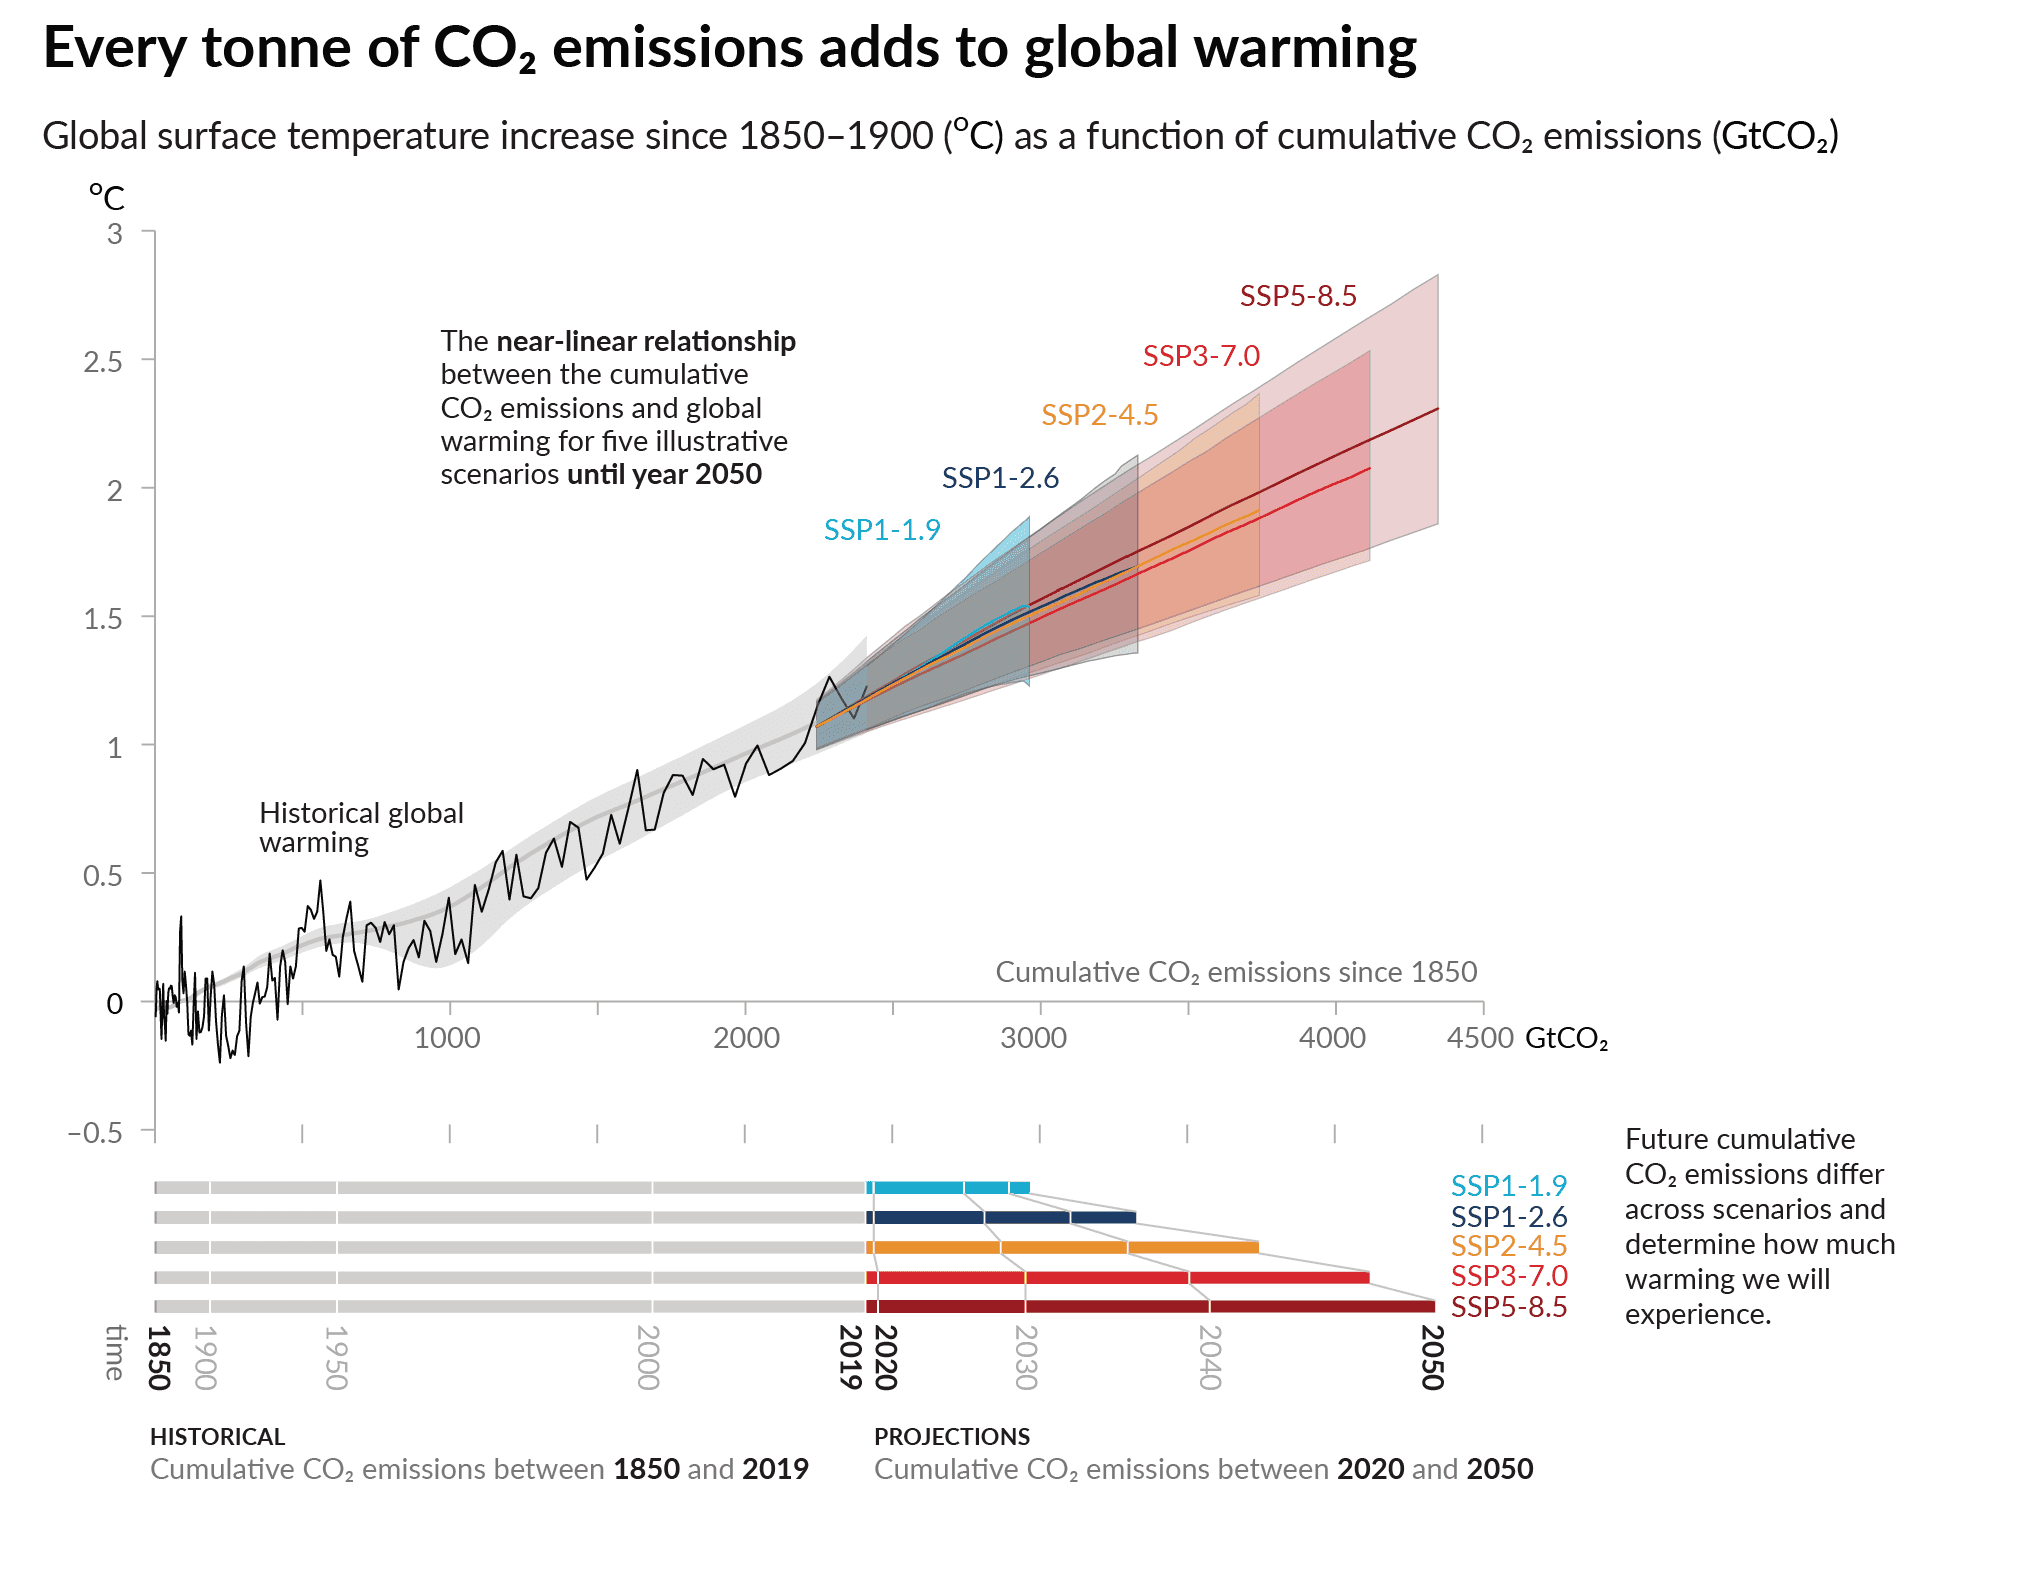 IPCC AR6 Working Group 1 Summary for Policymakers Climate Change